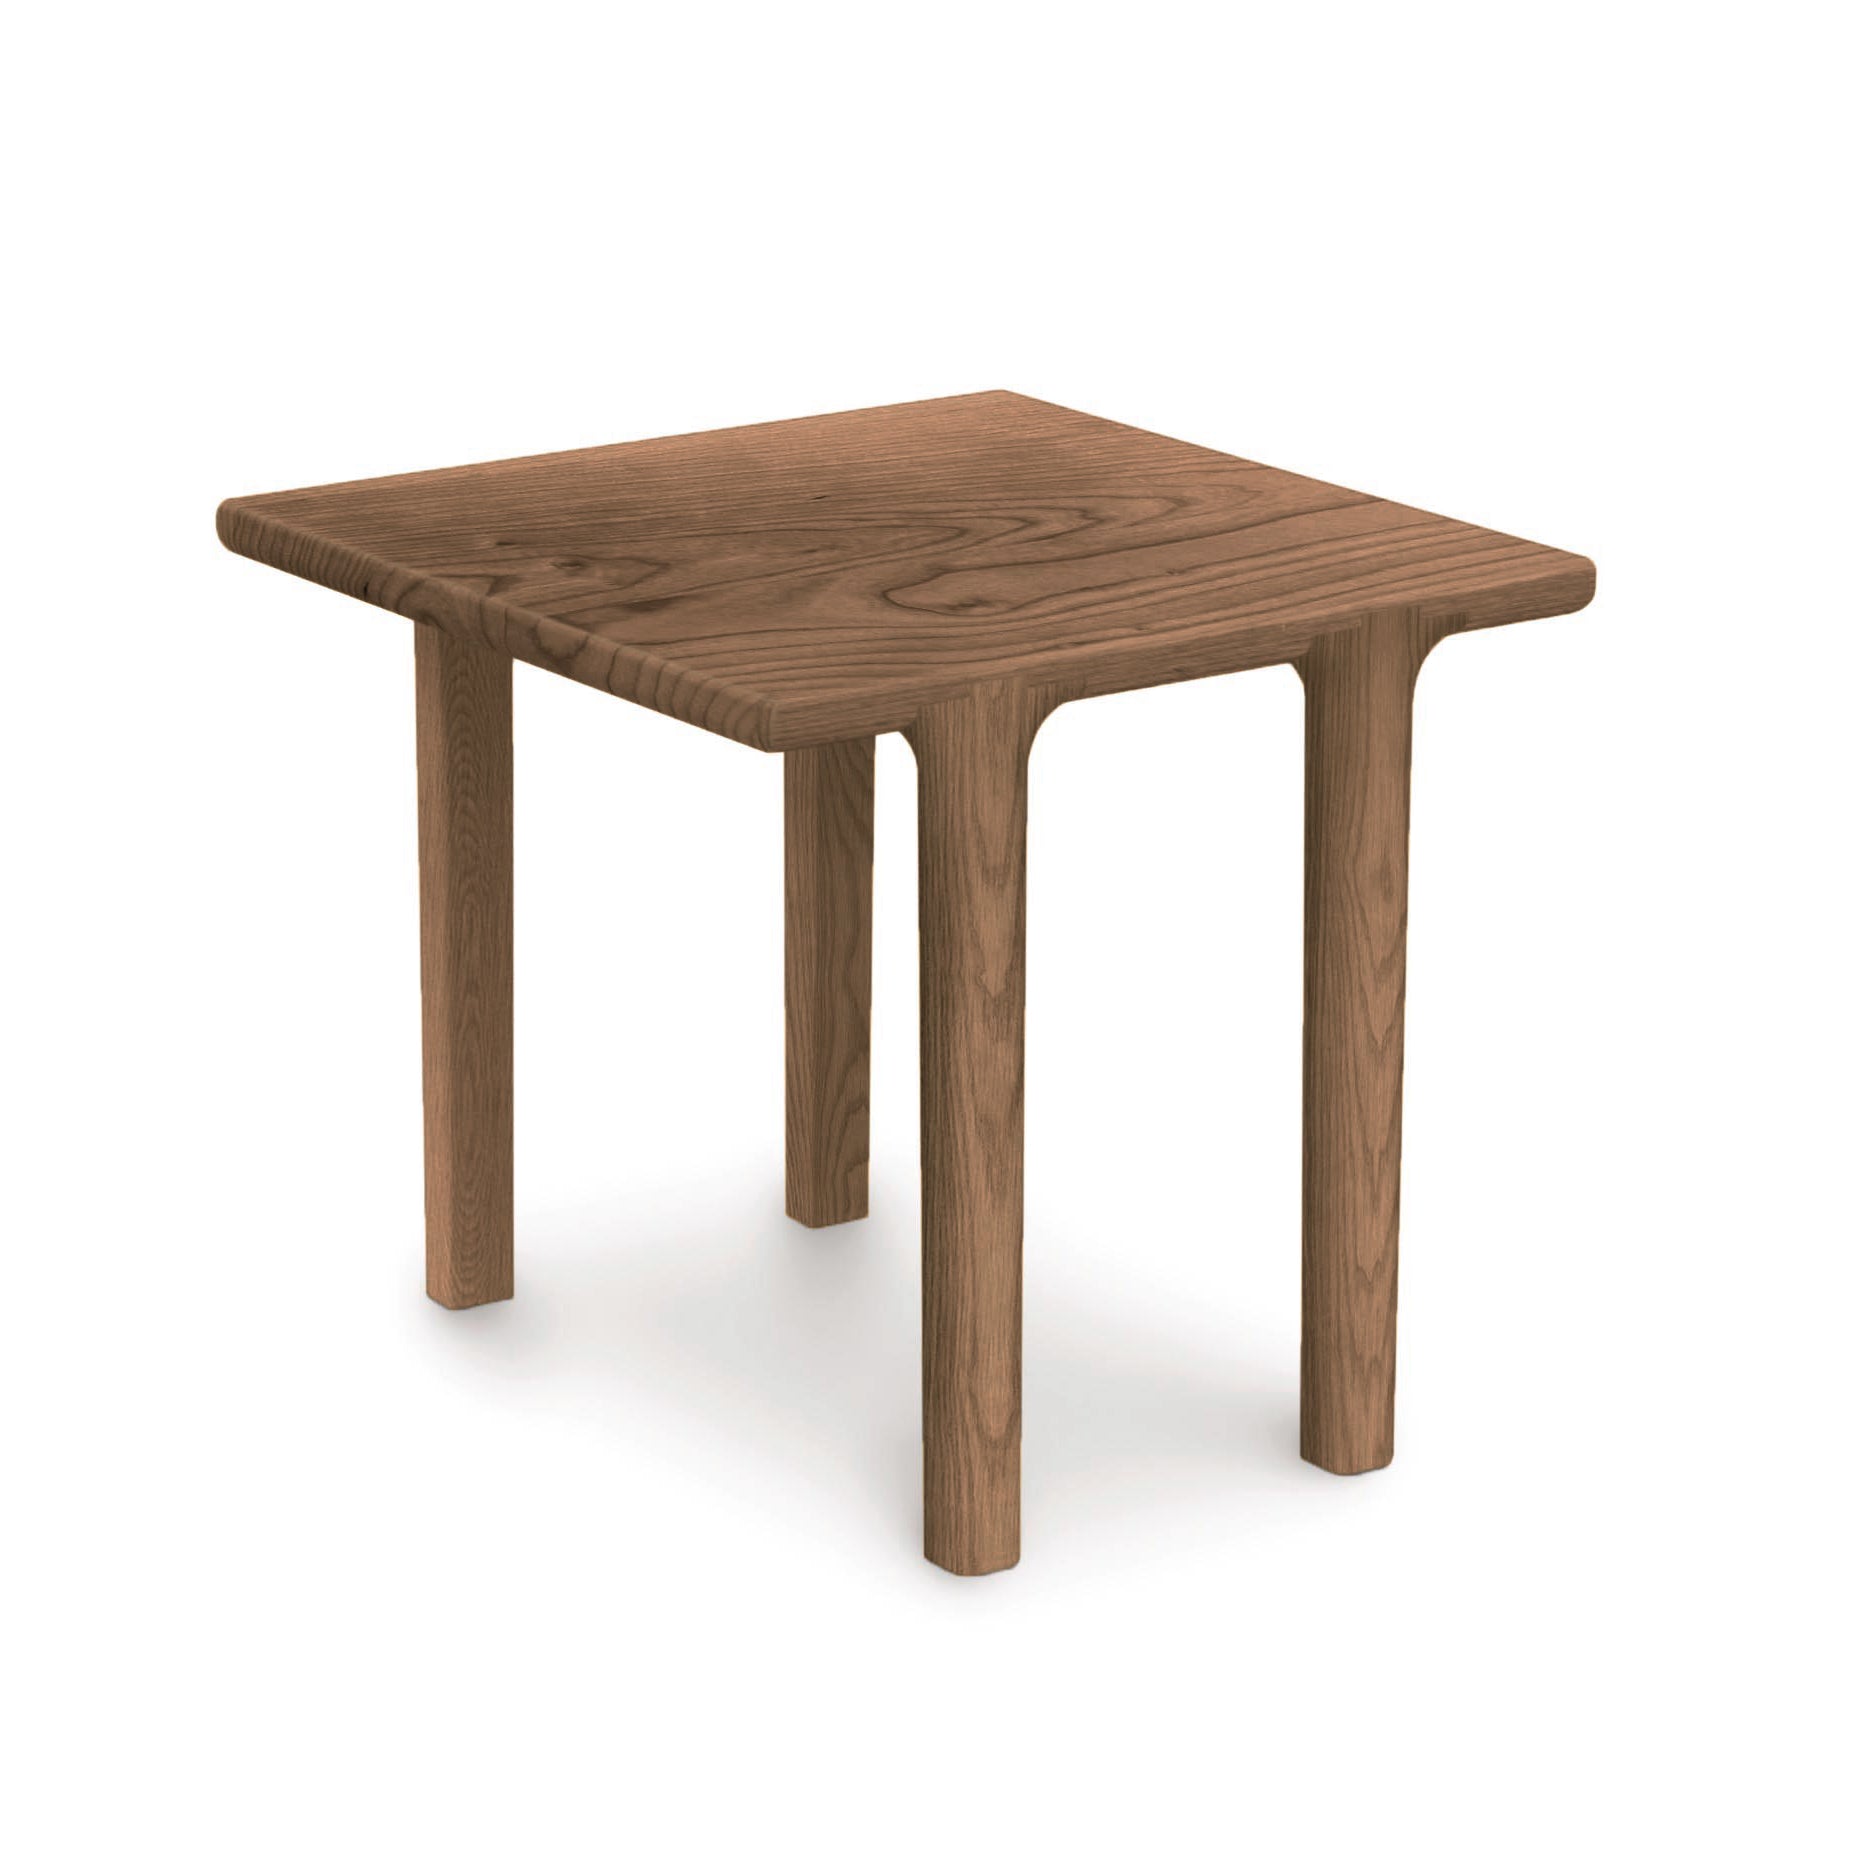 A simple Copeland Furniture Sierra Square End Table made of solid North American hardwood with four legs on a white background, radiating a modern personality.